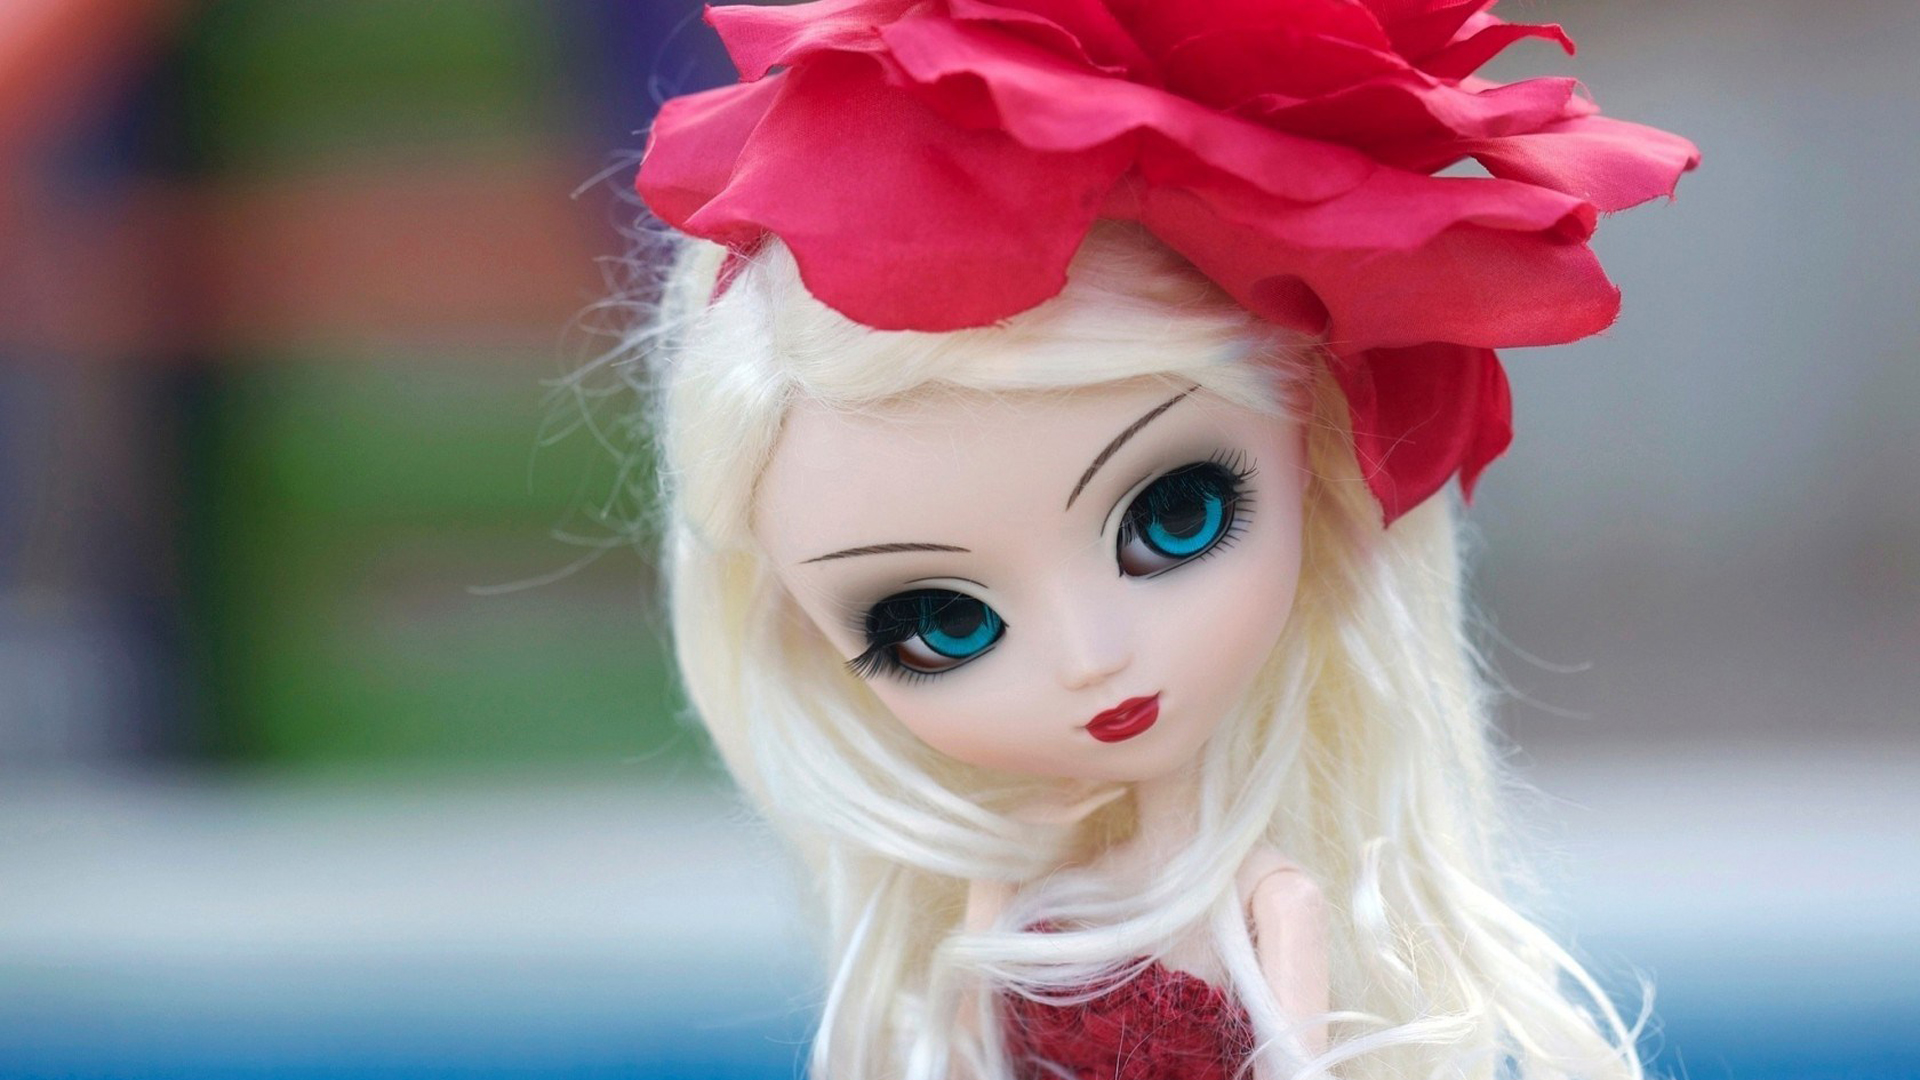 Girl Toy With White Hair And Red Flower 2K Doll